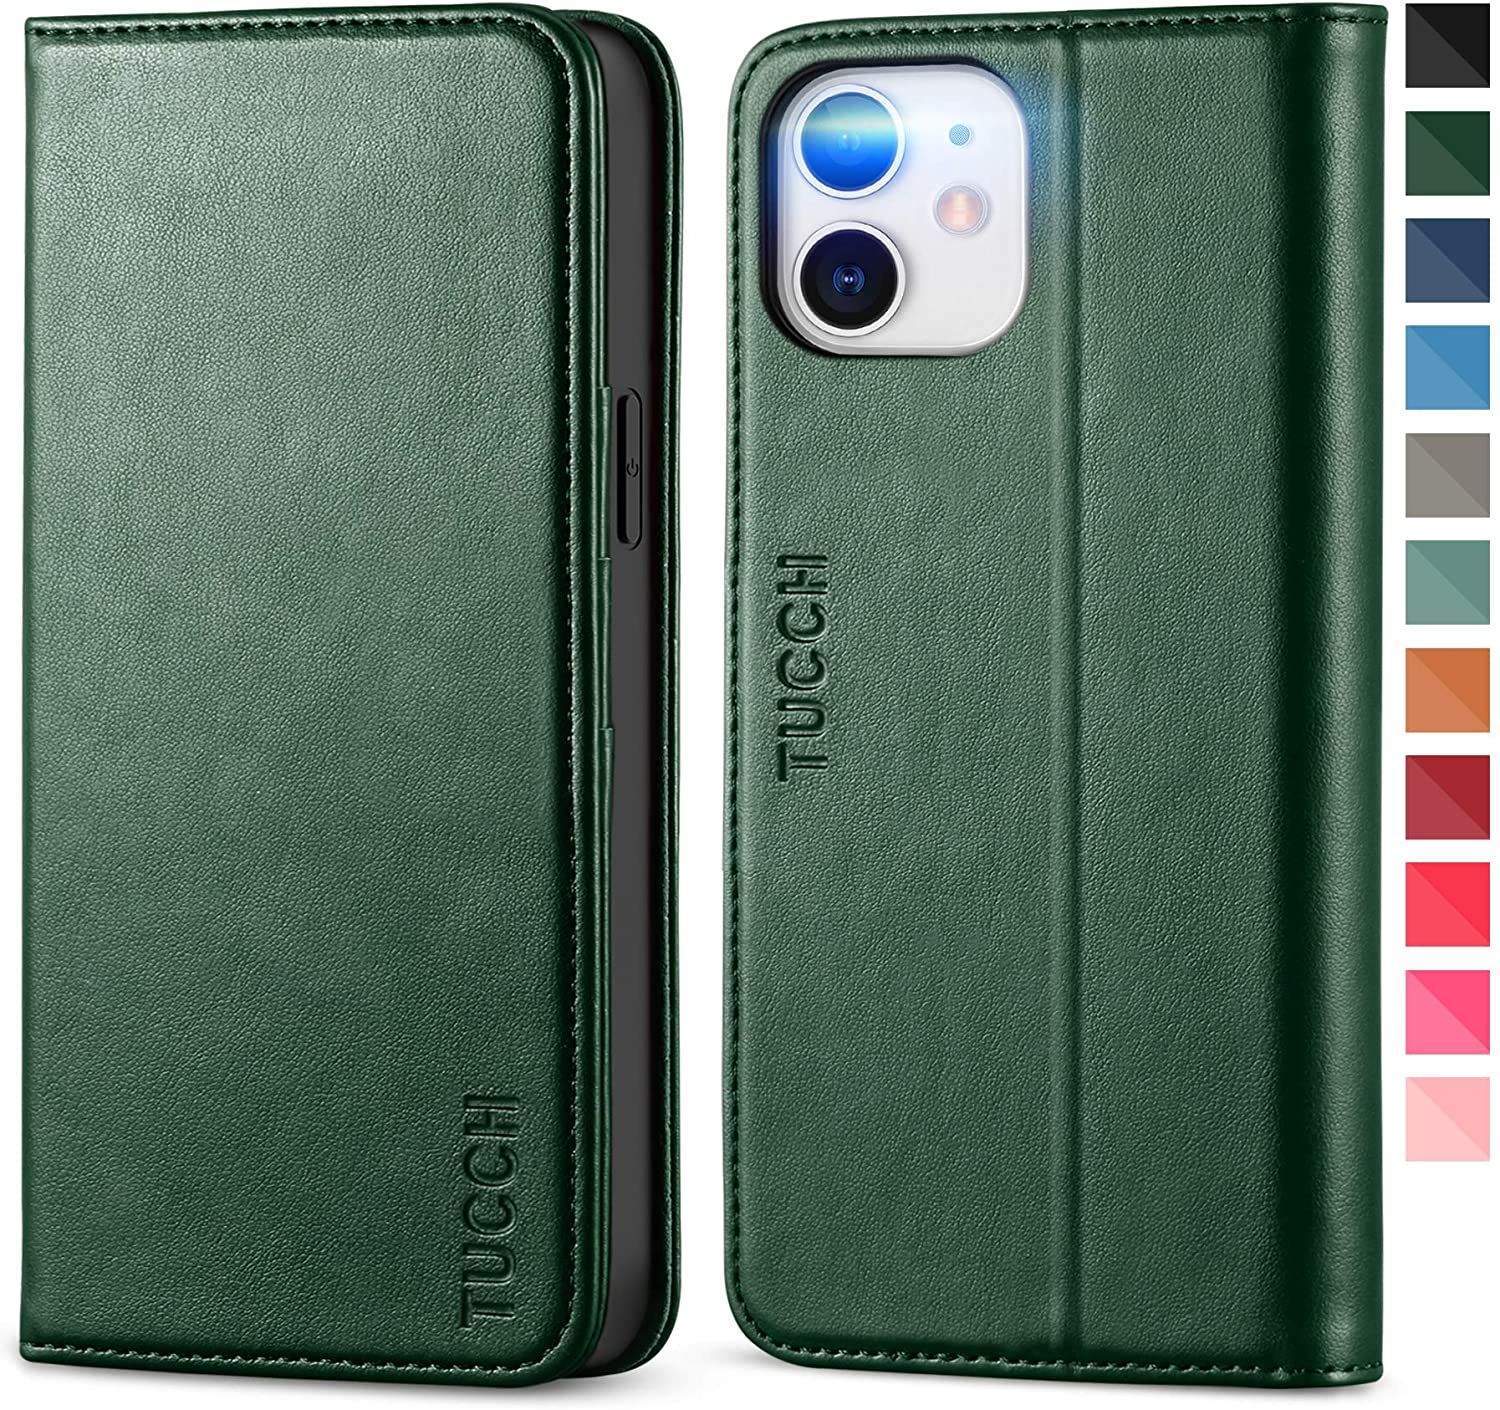 Tucch Leather Folio For Iphone